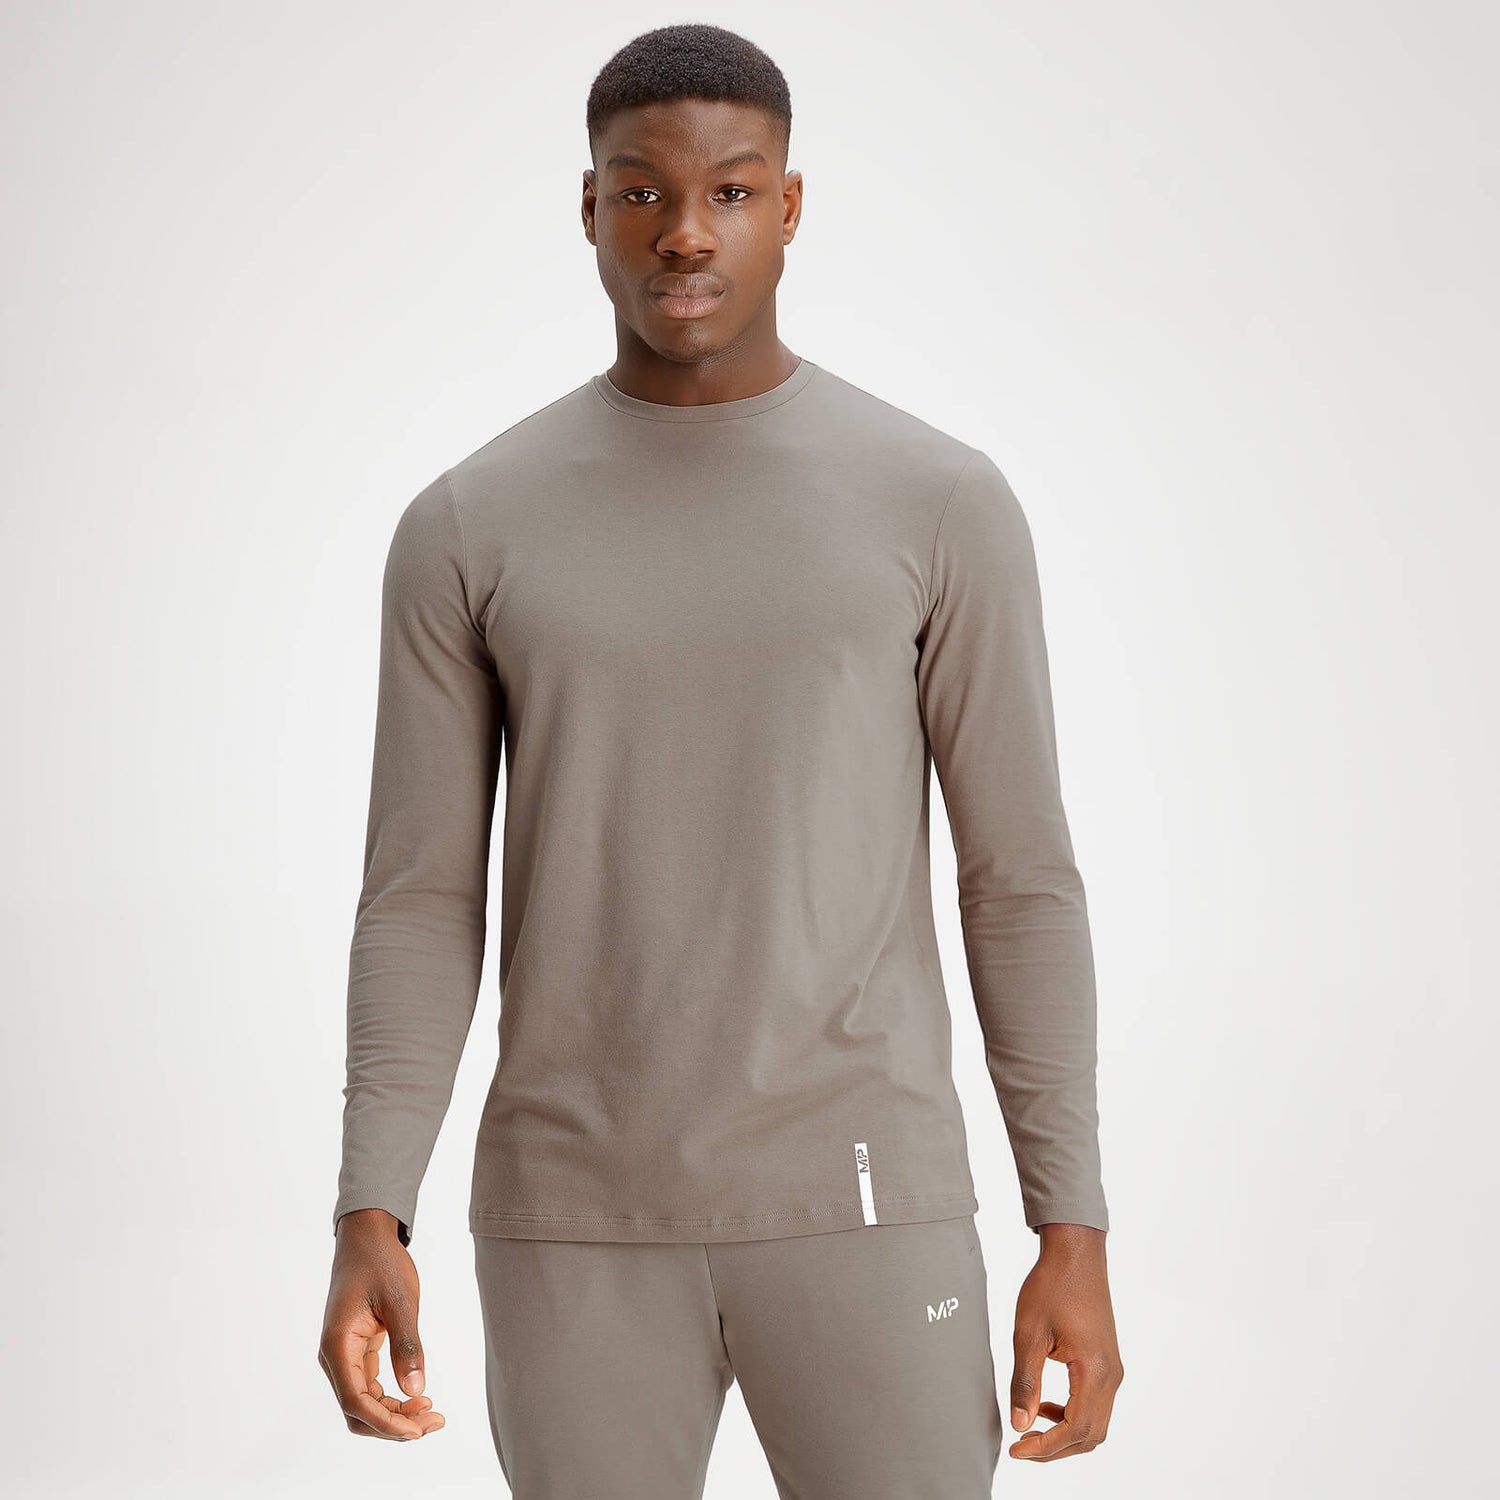 MP Men's Luxe Classic Long Sleeve Crew Top - Taupe - XXS